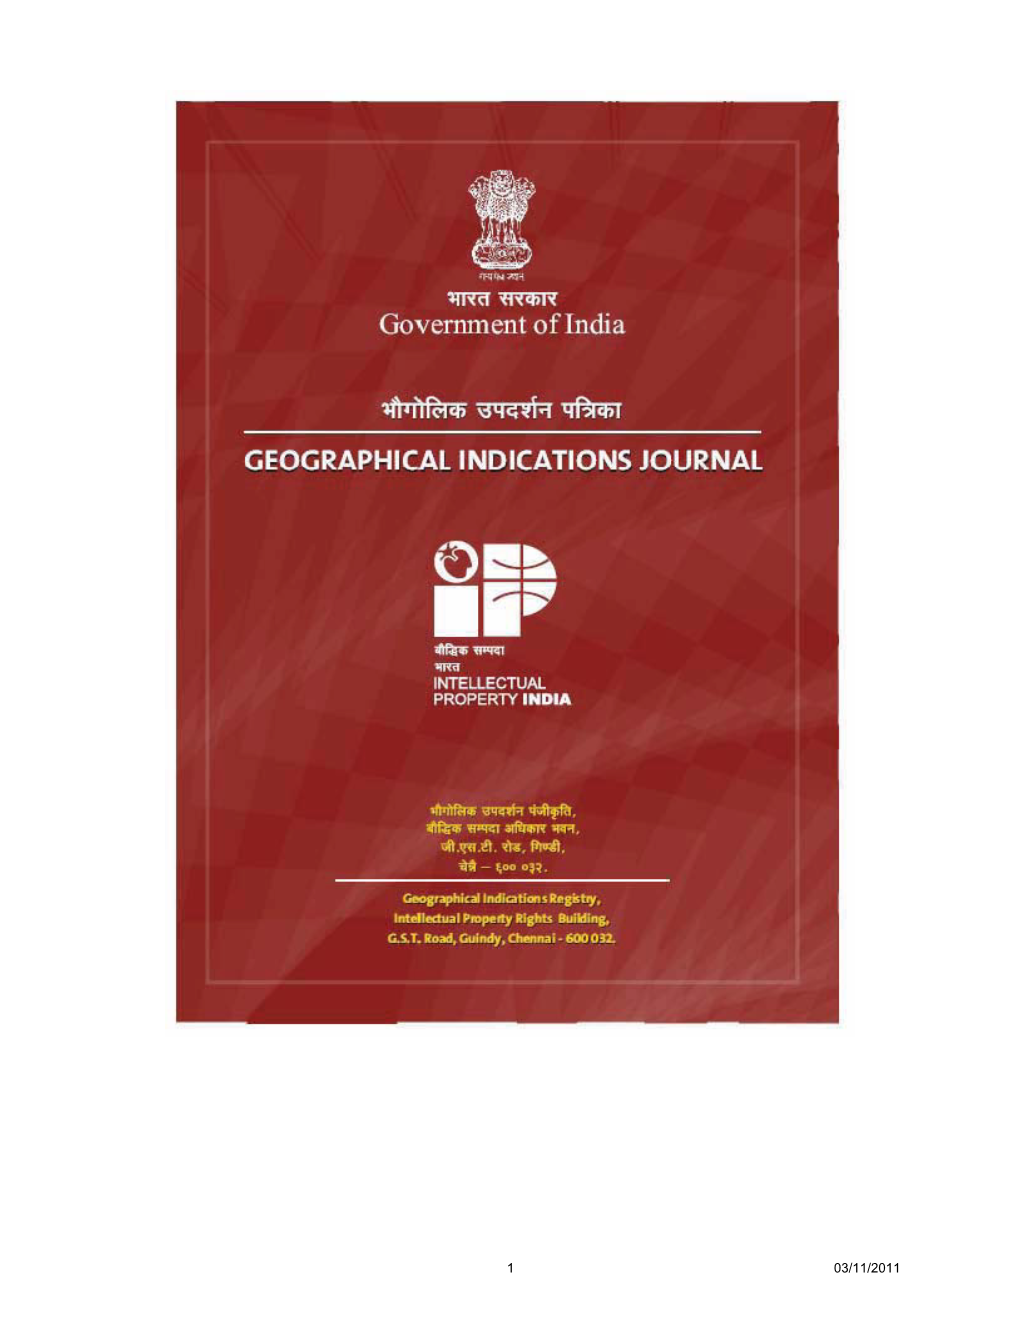 Government of India Geographical Indications